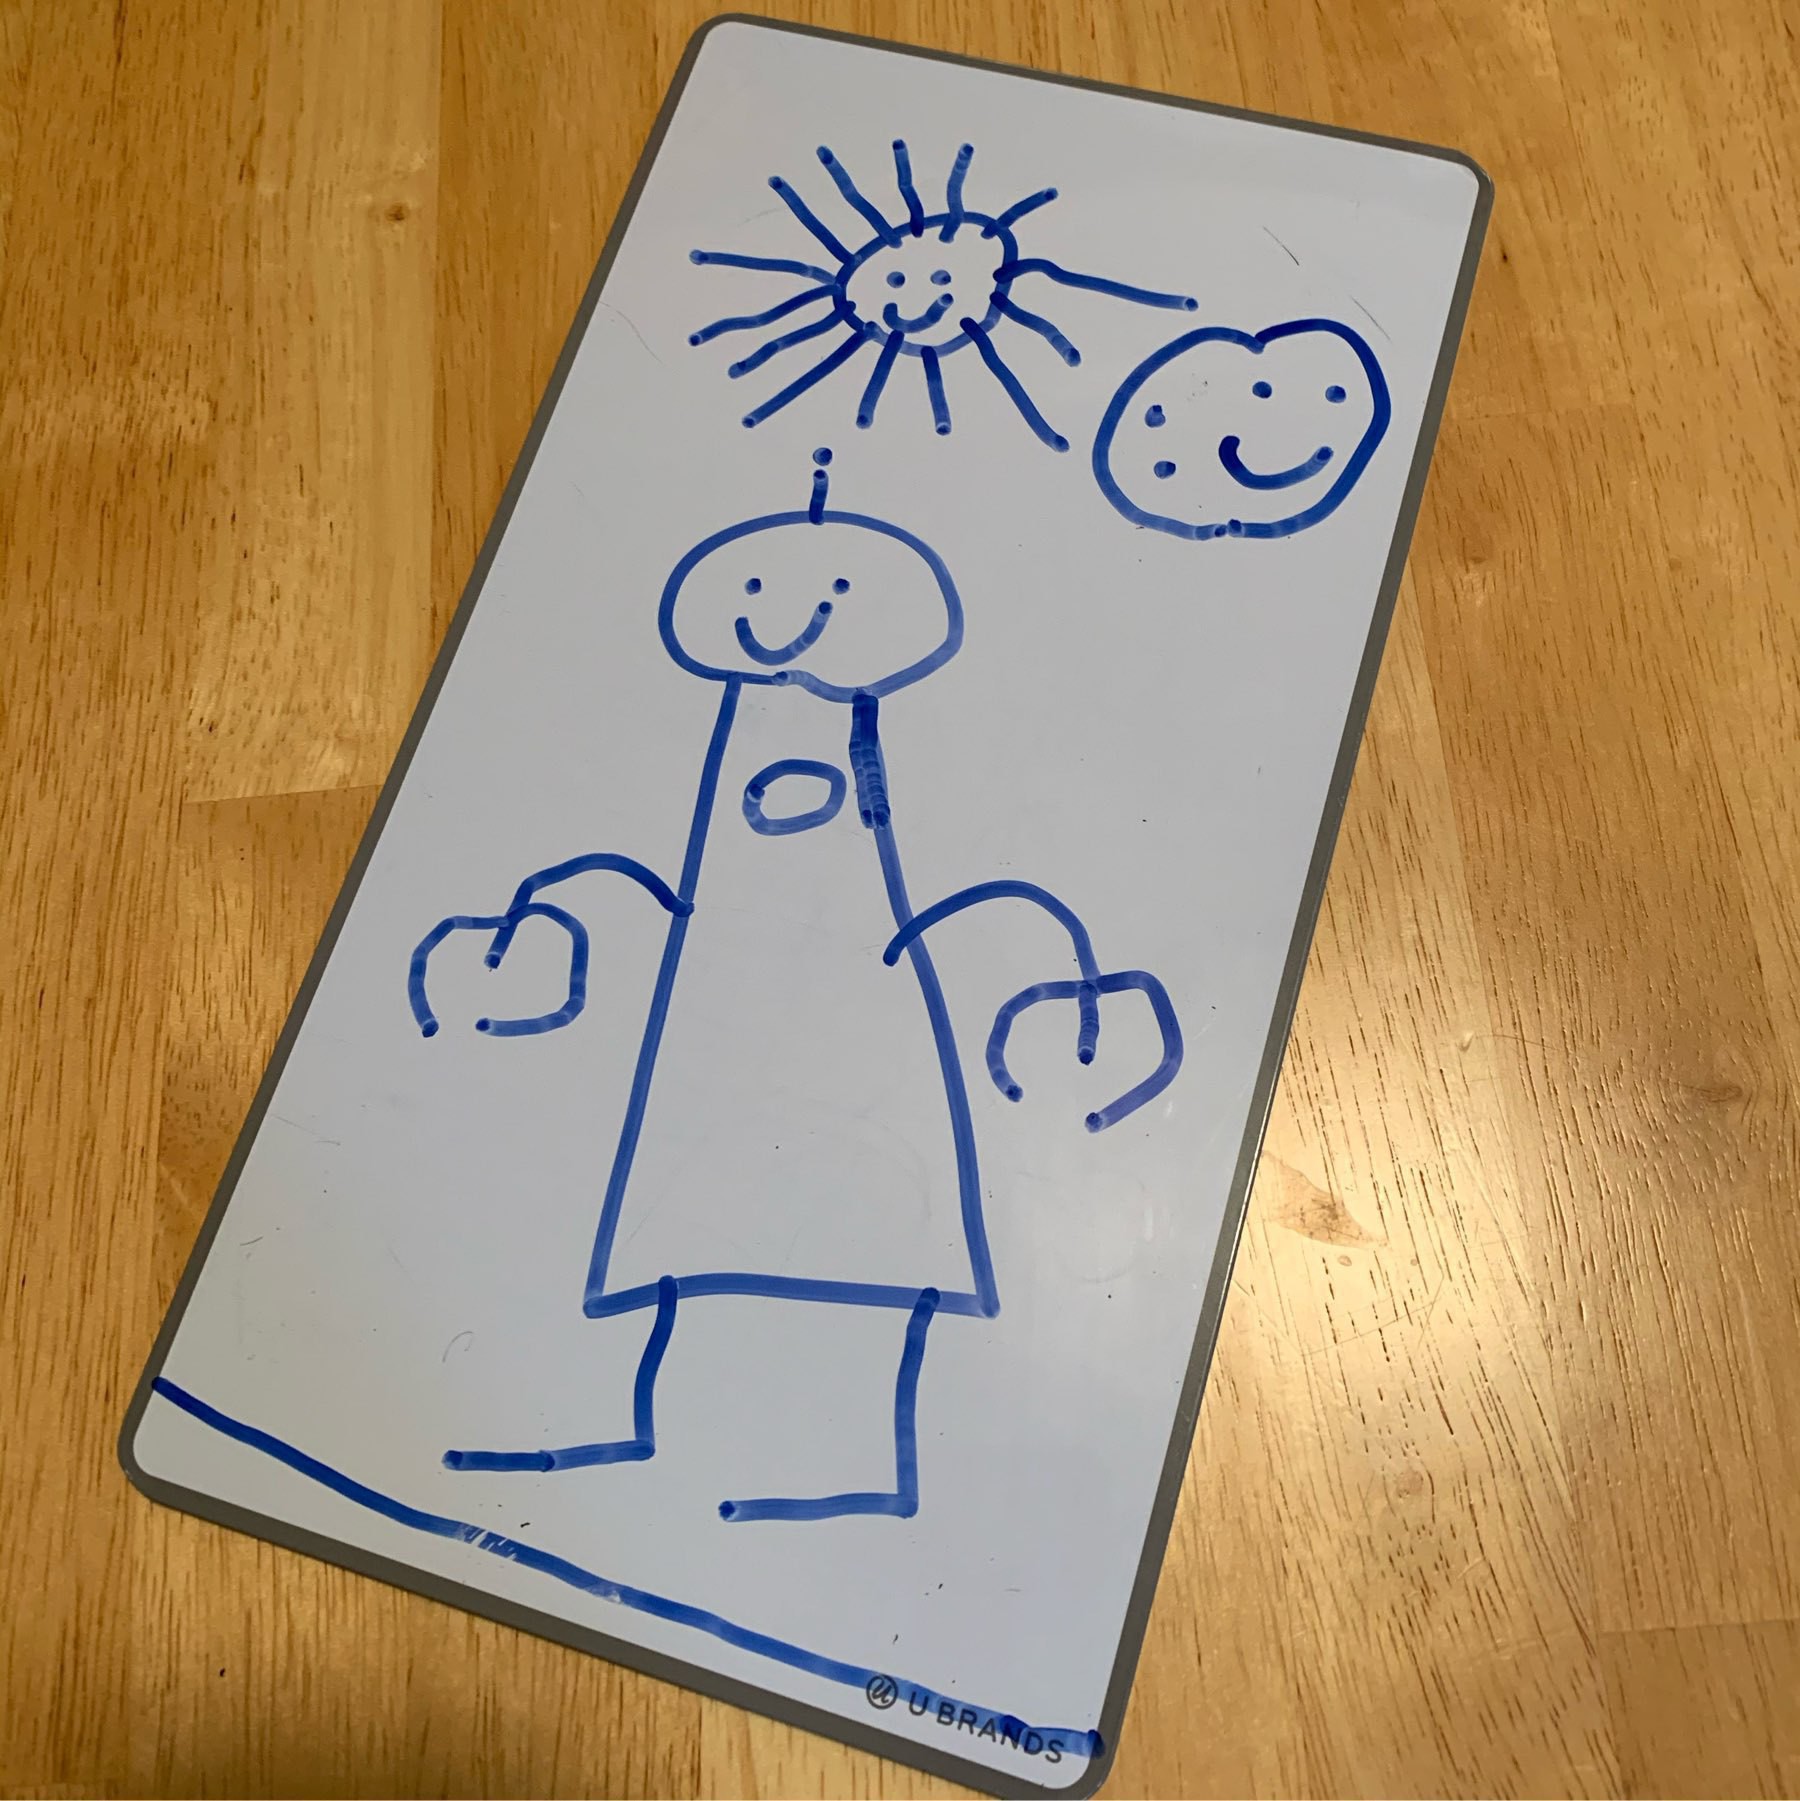 Robot drawing on dry erase board